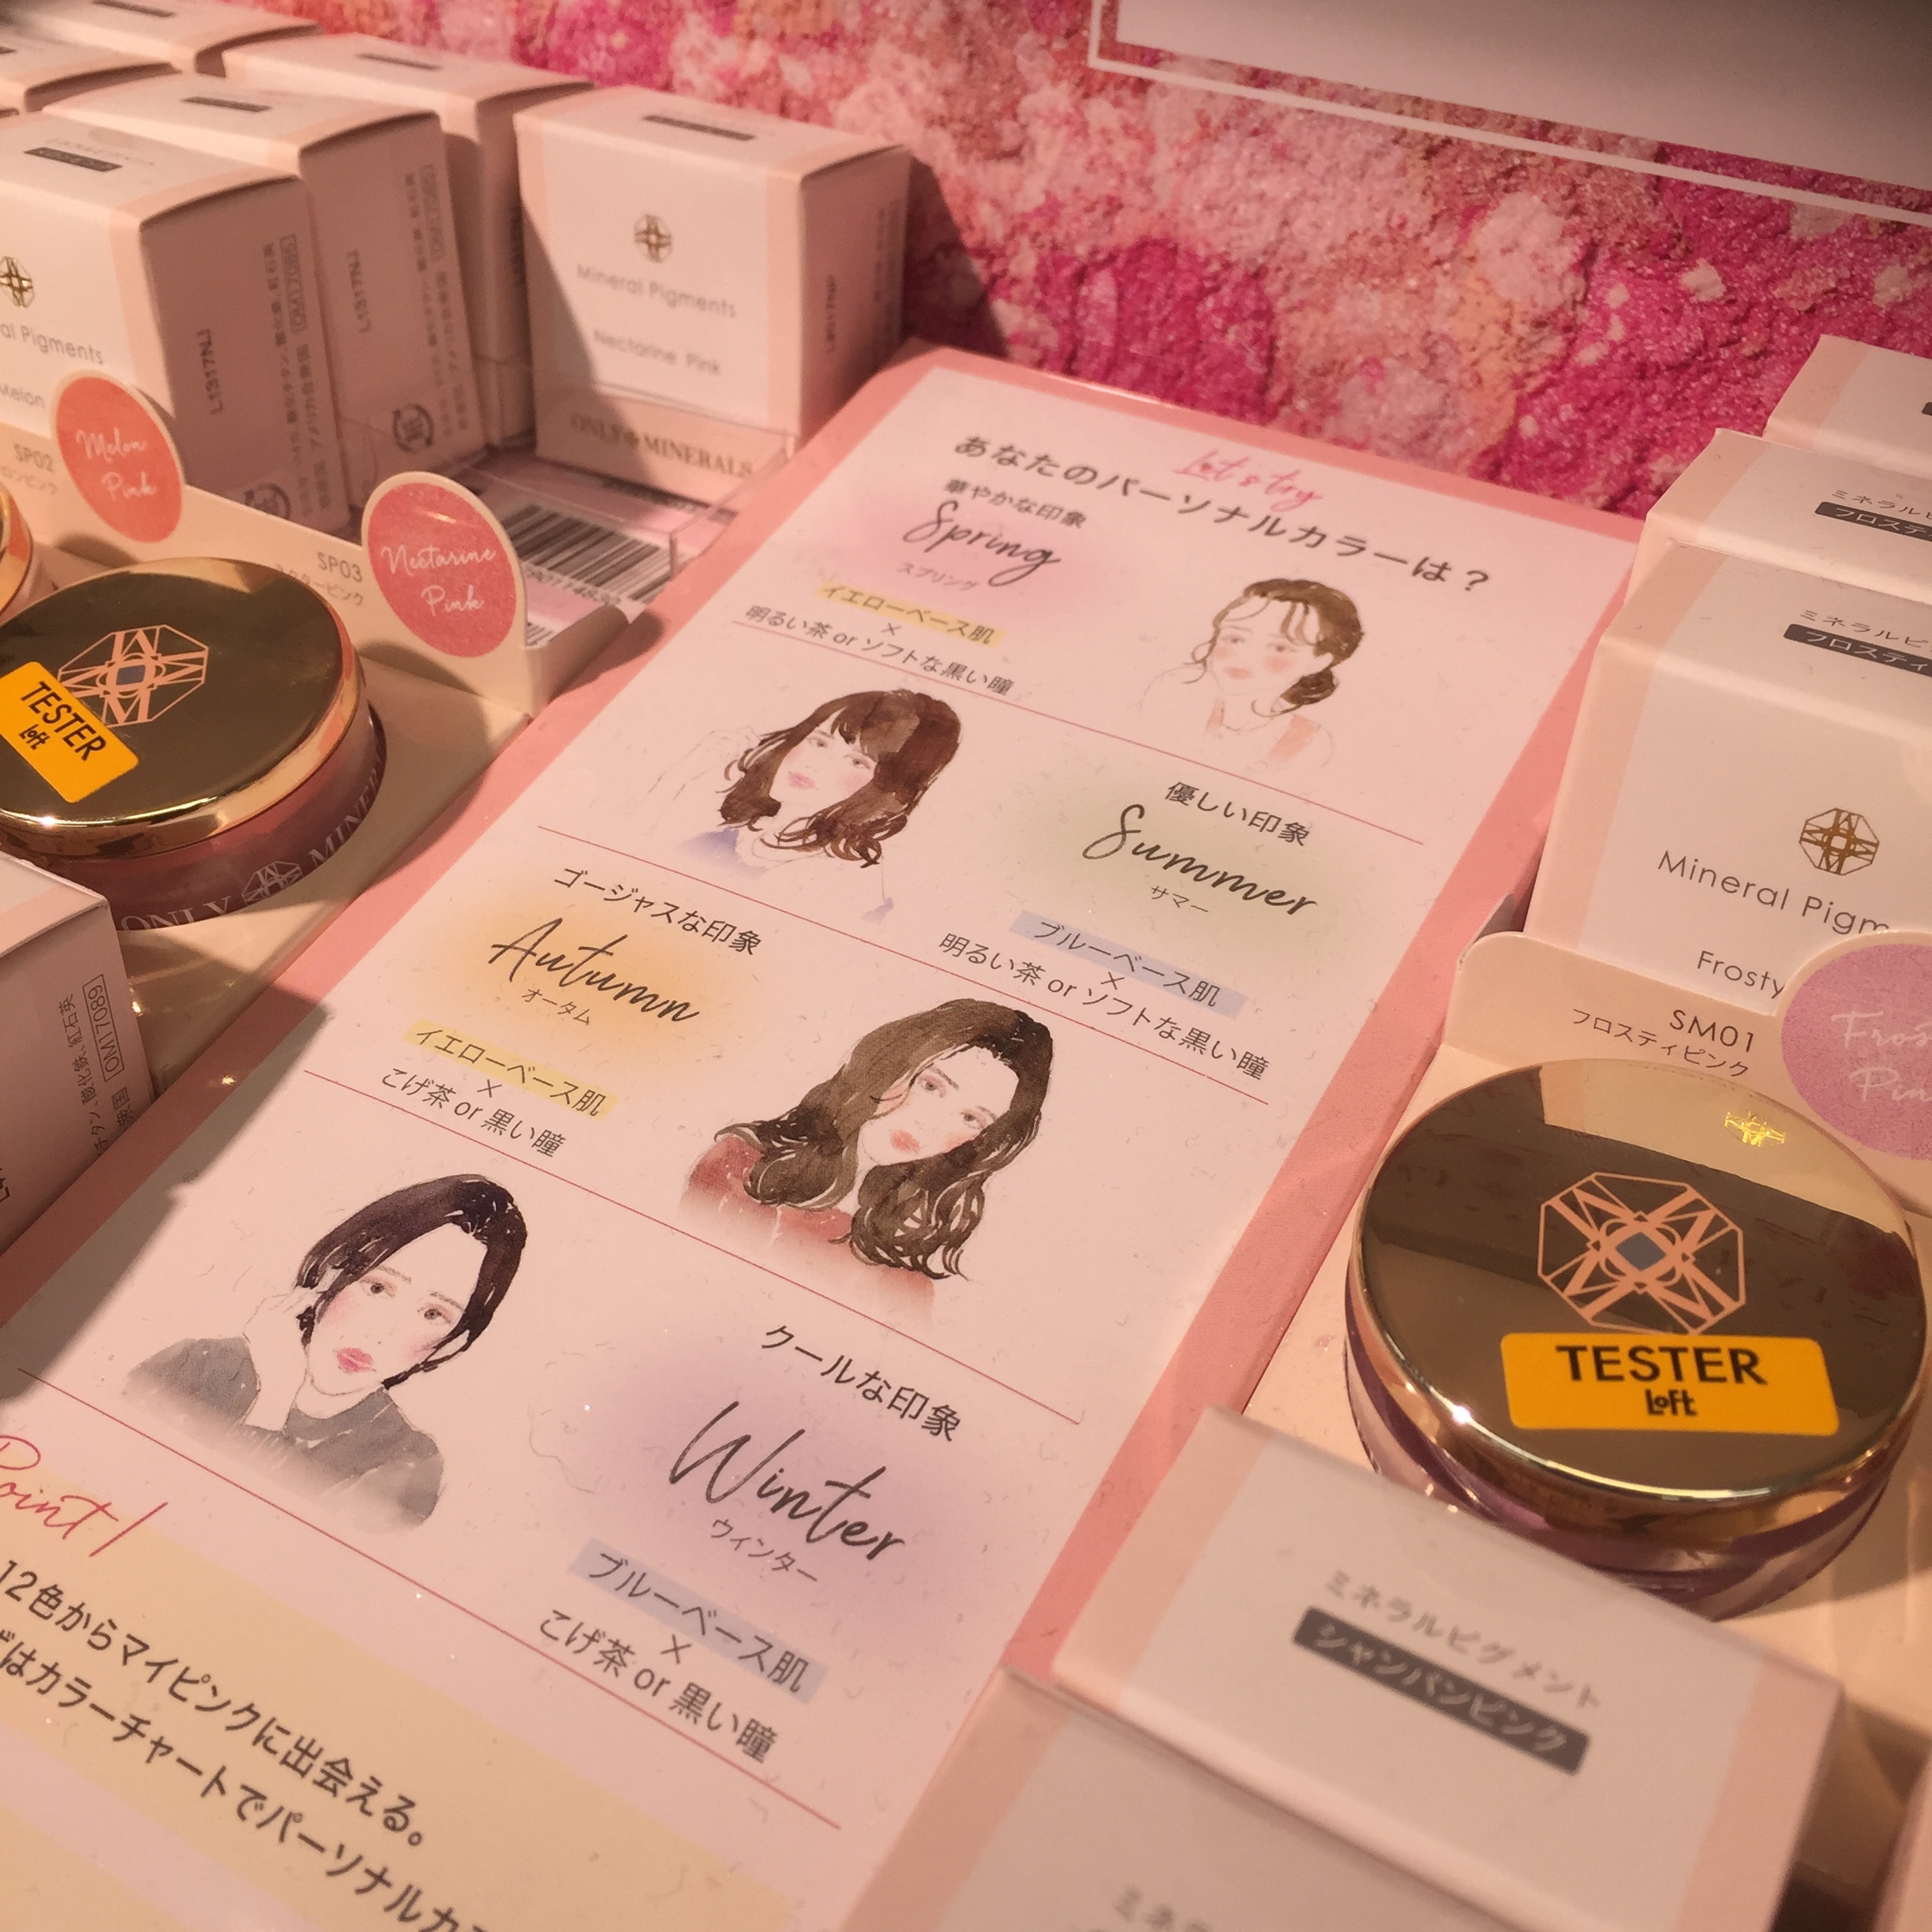  ONLY MINERALS Website and display adverts illustration ”My Pink Collection”  オンリーミネラルズ ウェブサイト、店頭広告イラストレーション 